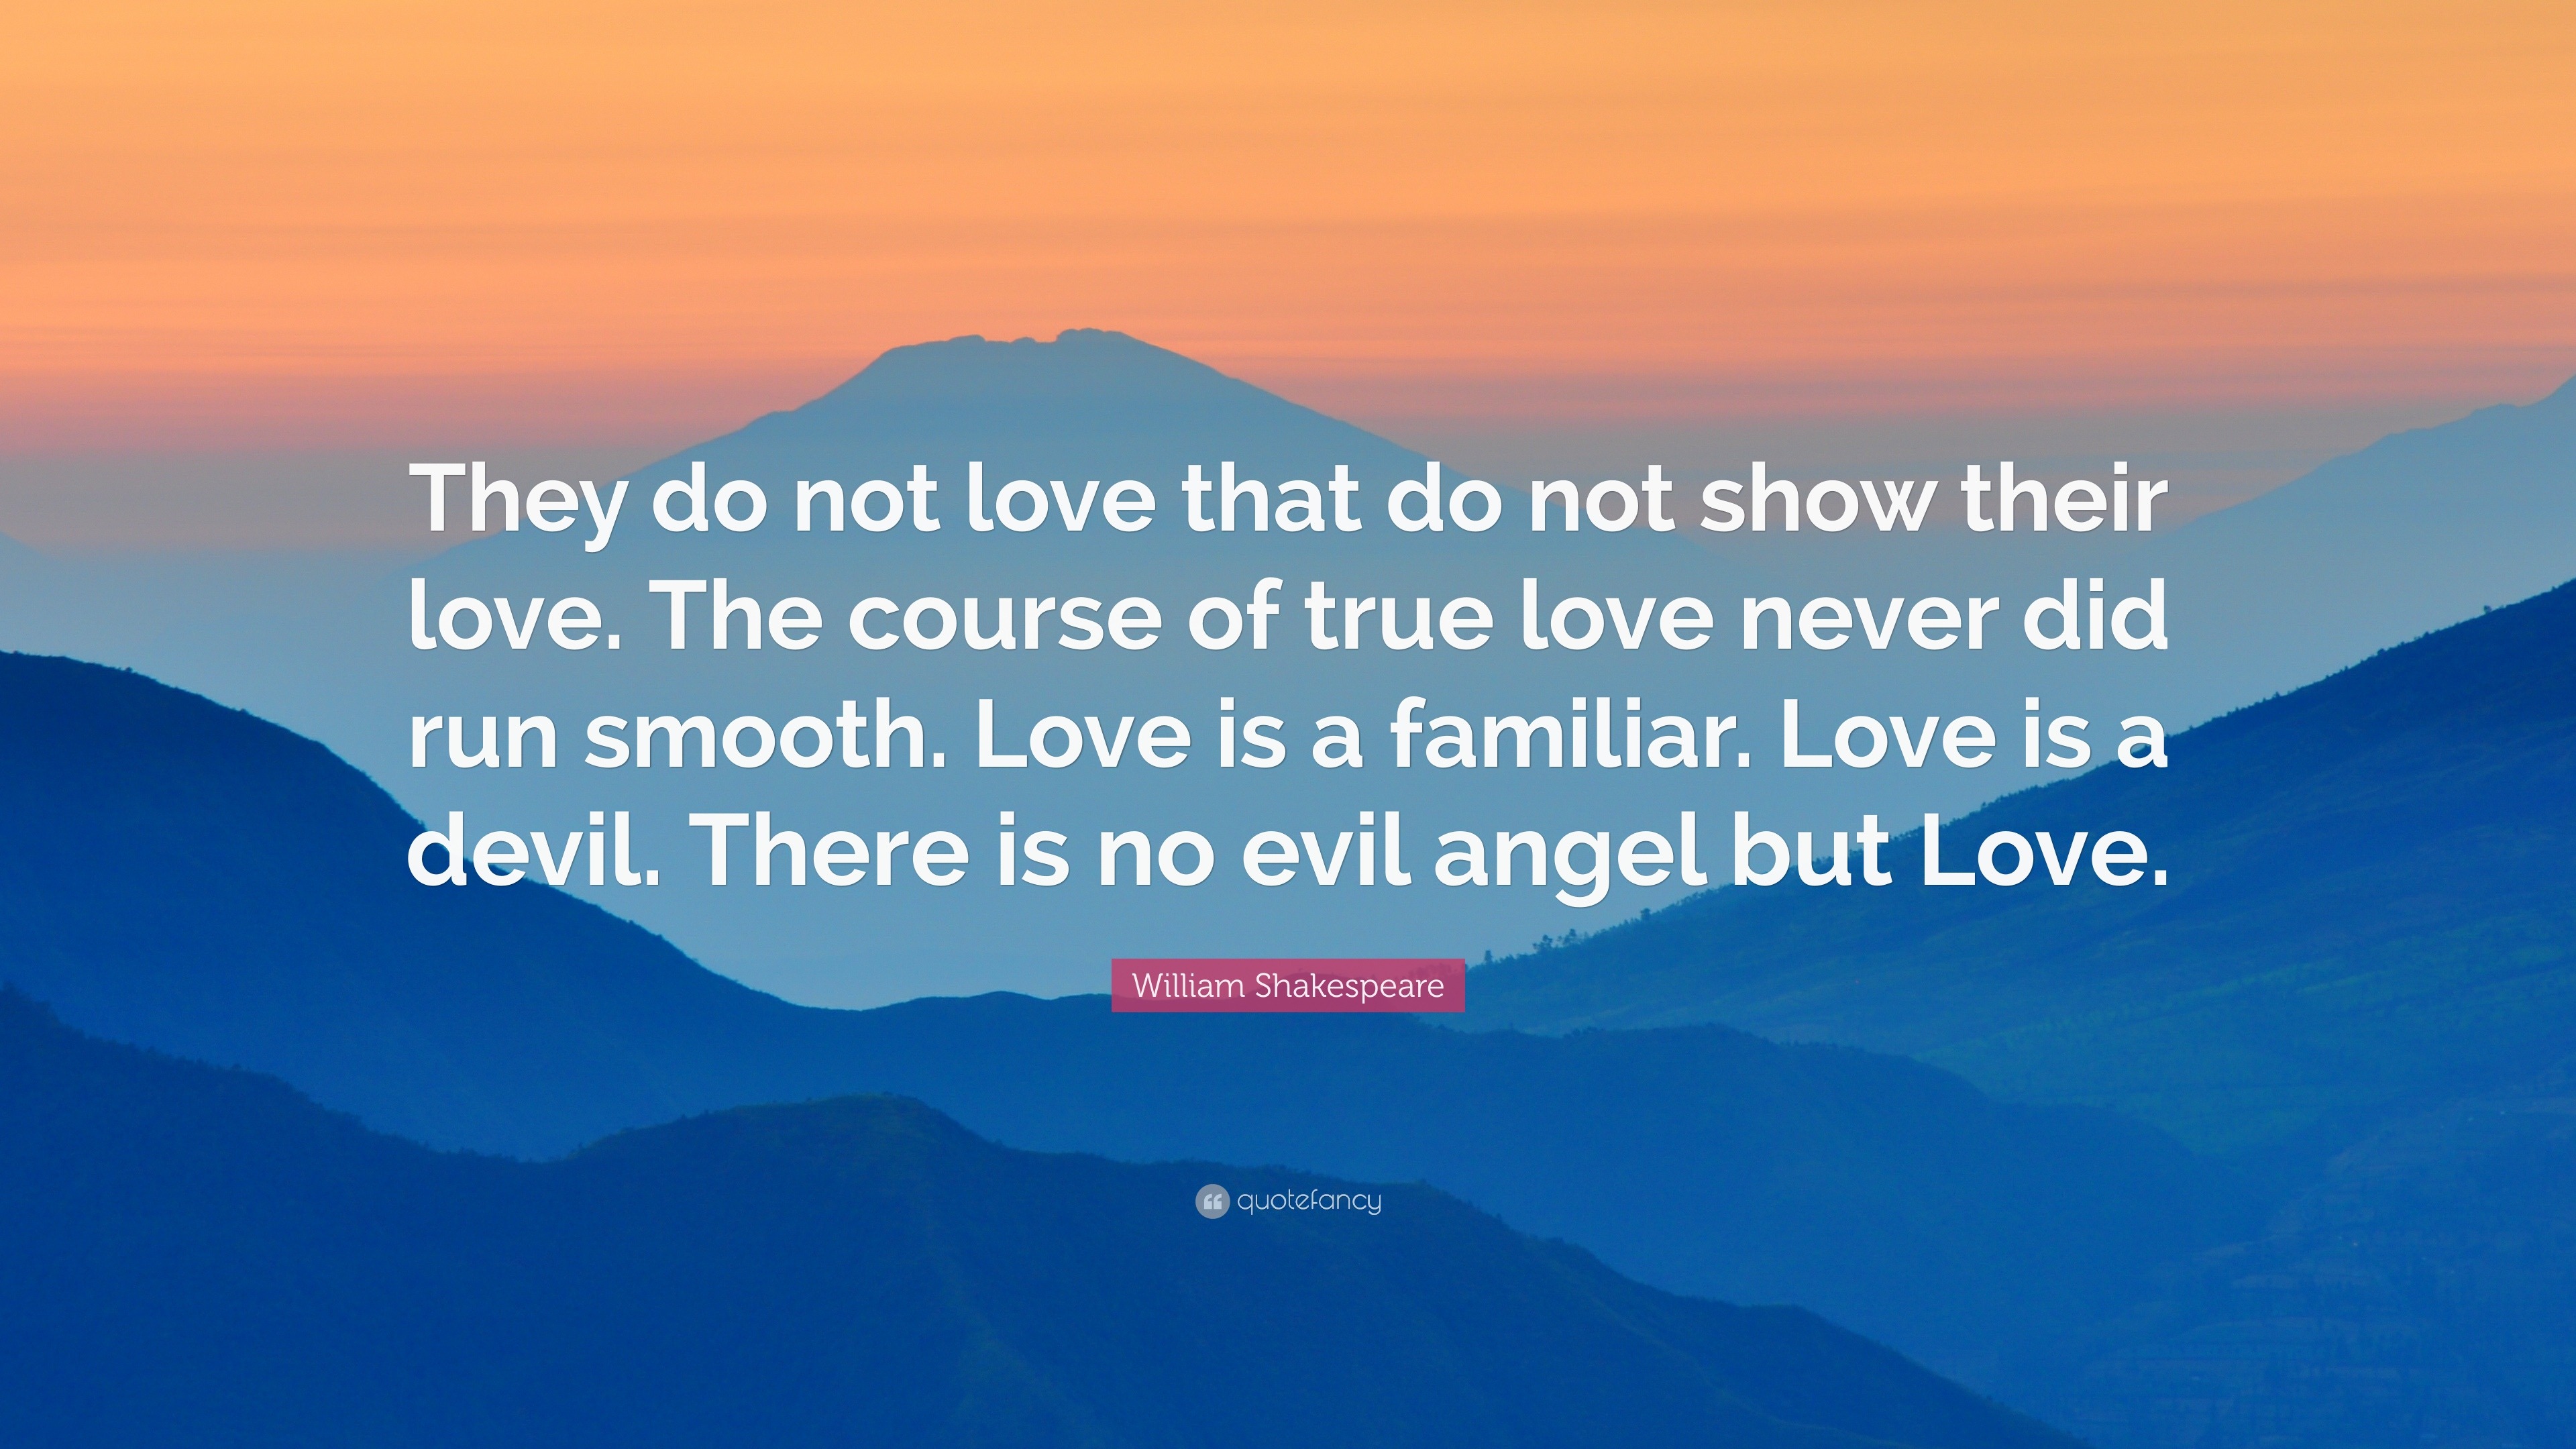 William Shakespeare Quote “They do not love that do not show their love